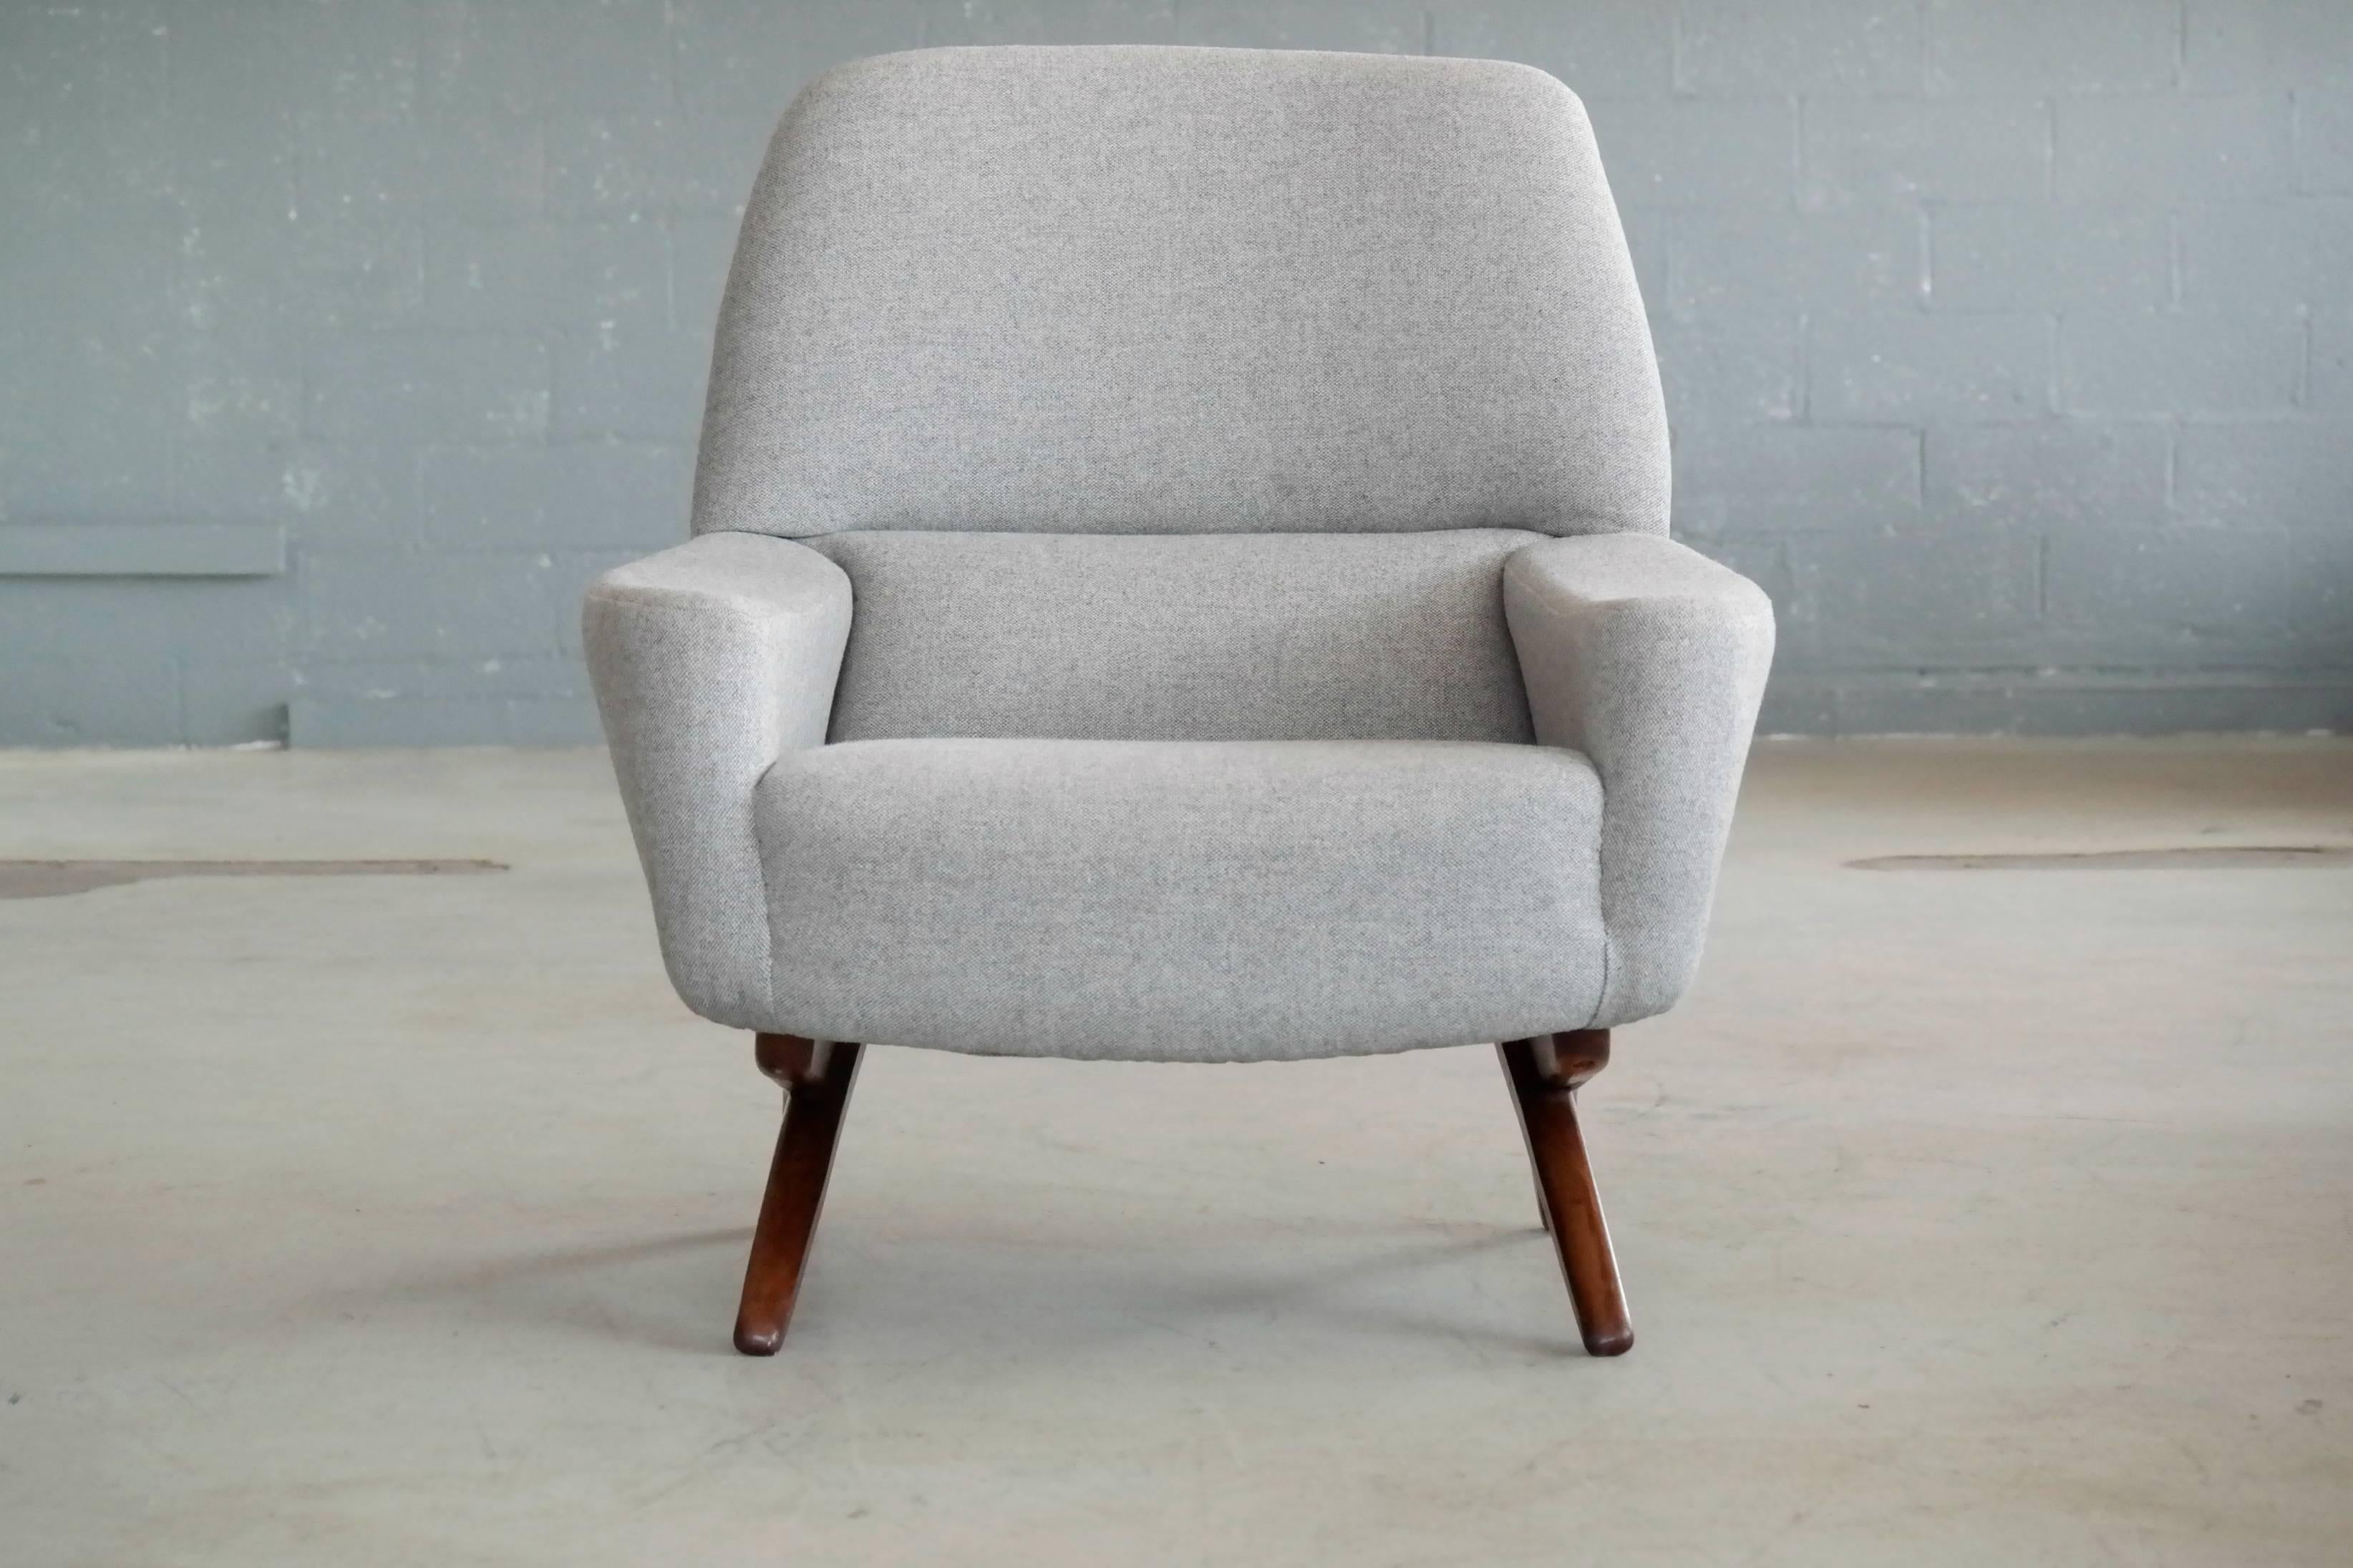 The ultimate cool lounge chair by Leif Hansen, 1960s. Increasingly sought after Leif Hansen often overlooked as one of the great Danish designers as his works were not made in great numbers are scarce in today's market. Hansen's designs bear some